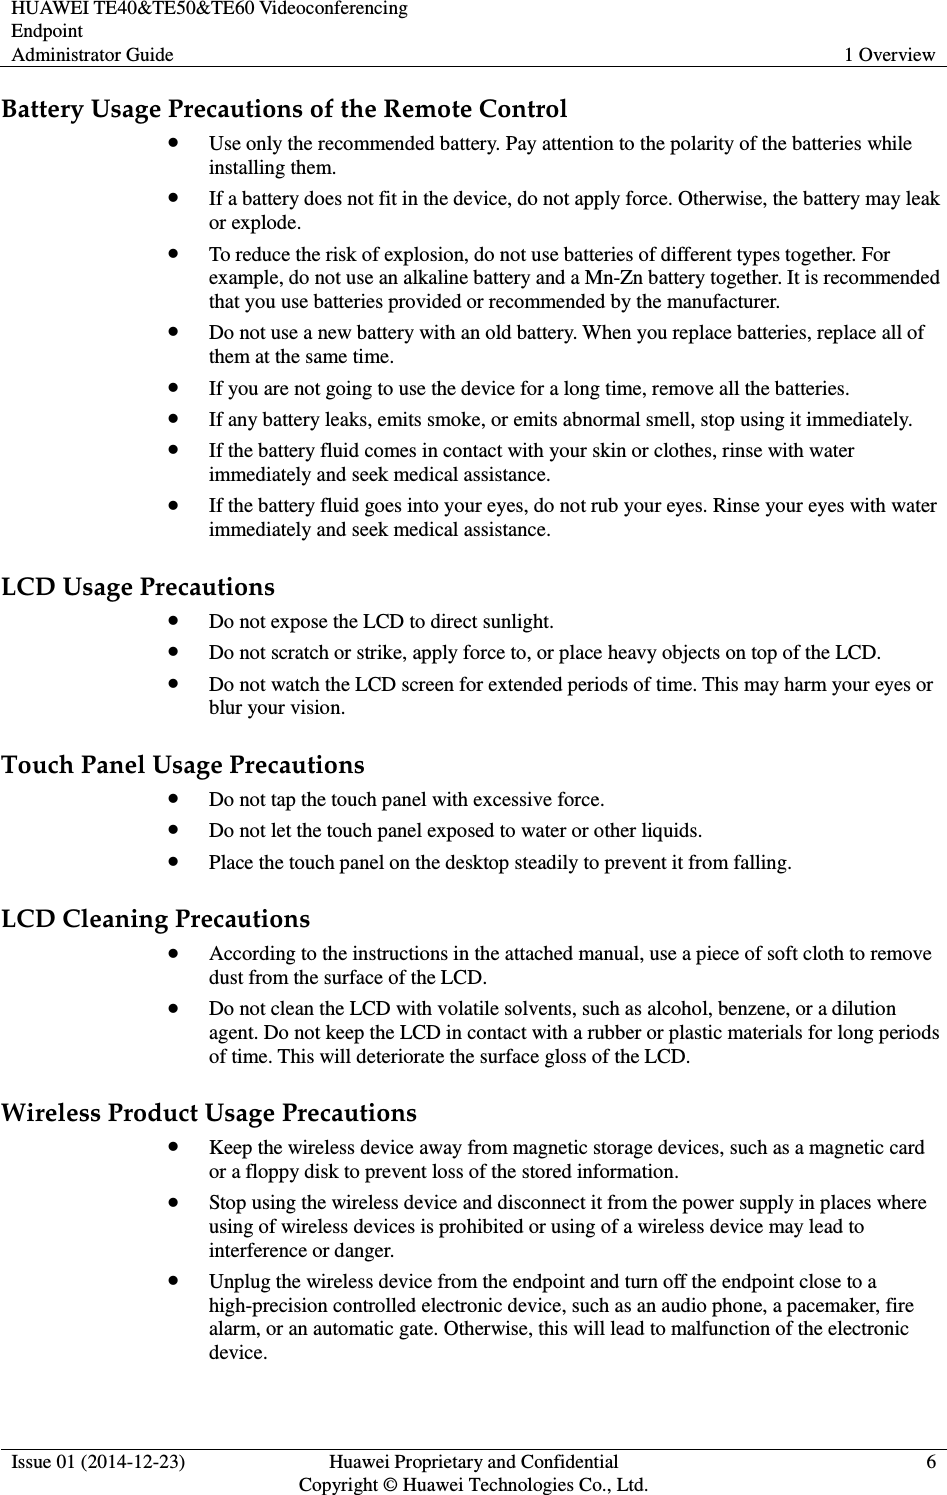 HUAWEI TE40&amp;TE50&amp;TE60 Videoconferencing Endpoint Administrator Guide  1 Overview  Issue 01 (2014-12-23)  Huawei Proprietary and Confidential                                     Copyright © Huawei Technologies Co., Ltd. 6  Battery Usage Precautions of the Remote Control  Use only the recommended battery. Pay attention to the polarity of the batteries while installing them.  If a battery does not fit in the device, do not apply force. Otherwise, the battery may leak or explode.  To reduce the risk of explosion, do not use batteries of different types together. For example, do not use an alkaline battery and a Mn-Zn battery together. It is recommended that you use batteries provided or recommended by the manufacturer.  Do not use a new battery with an old battery. When you replace batteries, replace all of them at the same time.  If you are not going to use the device for a long time, remove all the batteries.  If any battery leaks, emits smoke, or emits abnormal smell, stop using it immediately.  If the battery fluid comes in contact with your skin or clothes, rinse with water immediately and seek medical assistance.  If the battery fluid goes into your eyes, do not rub your eyes. Rinse your eyes with water immediately and seek medical assistance. LCD Usage Precautions  Do not expose the LCD to direct sunlight.  Do not scratch or strike, apply force to, or place heavy objects on top of the LCD.  Do not watch the LCD screen for extended periods of time. This may harm your eyes or blur your vision. Touch Panel Usage Precautions  Do not tap the touch panel with excessive force.  Do not let the touch panel exposed to water or other liquids.  Place the touch panel on the desktop steadily to prevent it from falling. LCD Cleaning Precautions  According to the instructions in the attached manual, use a piece of soft cloth to remove dust from the surface of the LCD.  Do not clean the LCD with volatile solvents, such as alcohol, benzene, or a dilution agent. Do not keep the LCD in contact with a rubber or plastic materials for long periods of time. This will deteriorate the surface gloss of the LCD. Wireless Product Usage Precautions  Keep the wireless device away from magnetic storage devices, such as a magnetic card or a floppy disk to prevent loss of the stored information.  Stop using the wireless device and disconnect it from the power supply in places where using of wireless devices is prohibited or using of a wireless device may lead to interference or danger.  Unplug the wireless device from the endpoint and turn off the endpoint close to a high-precision controlled electronic device, such as an audio phone, a pacemaker, fire alarm, or an automatic gate. Otherwise, this will lead to malfunction of the electronic device. 